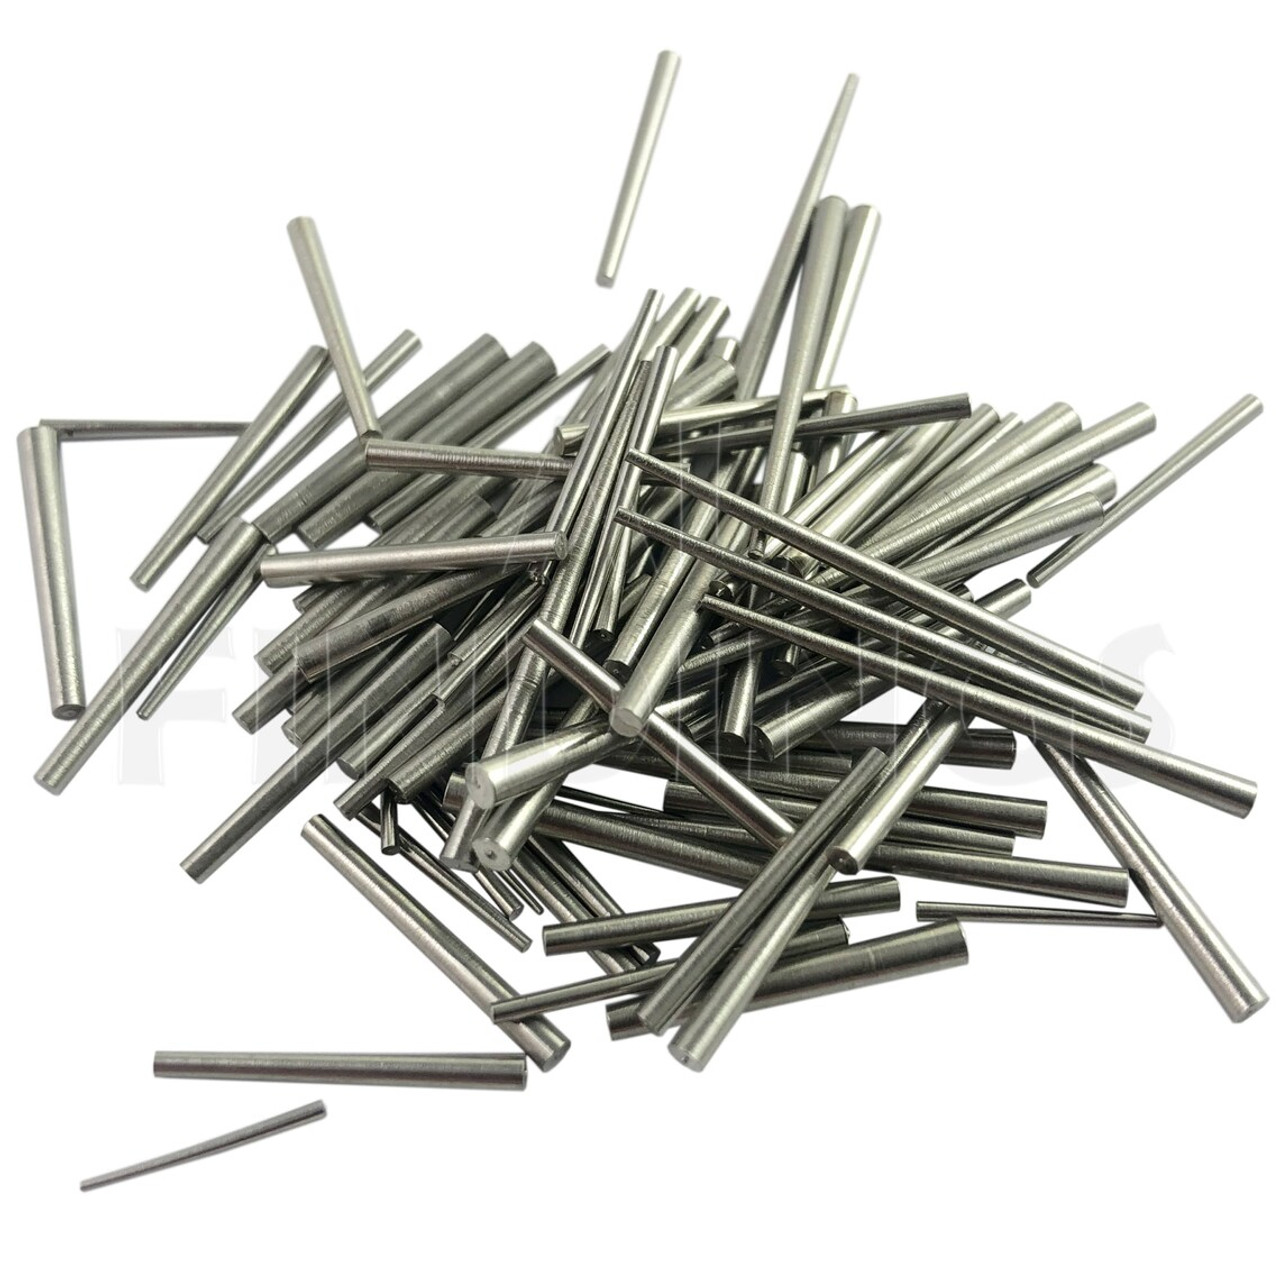 Assorted Tapered Pins for Watch Bands Repair - 100 Pcs